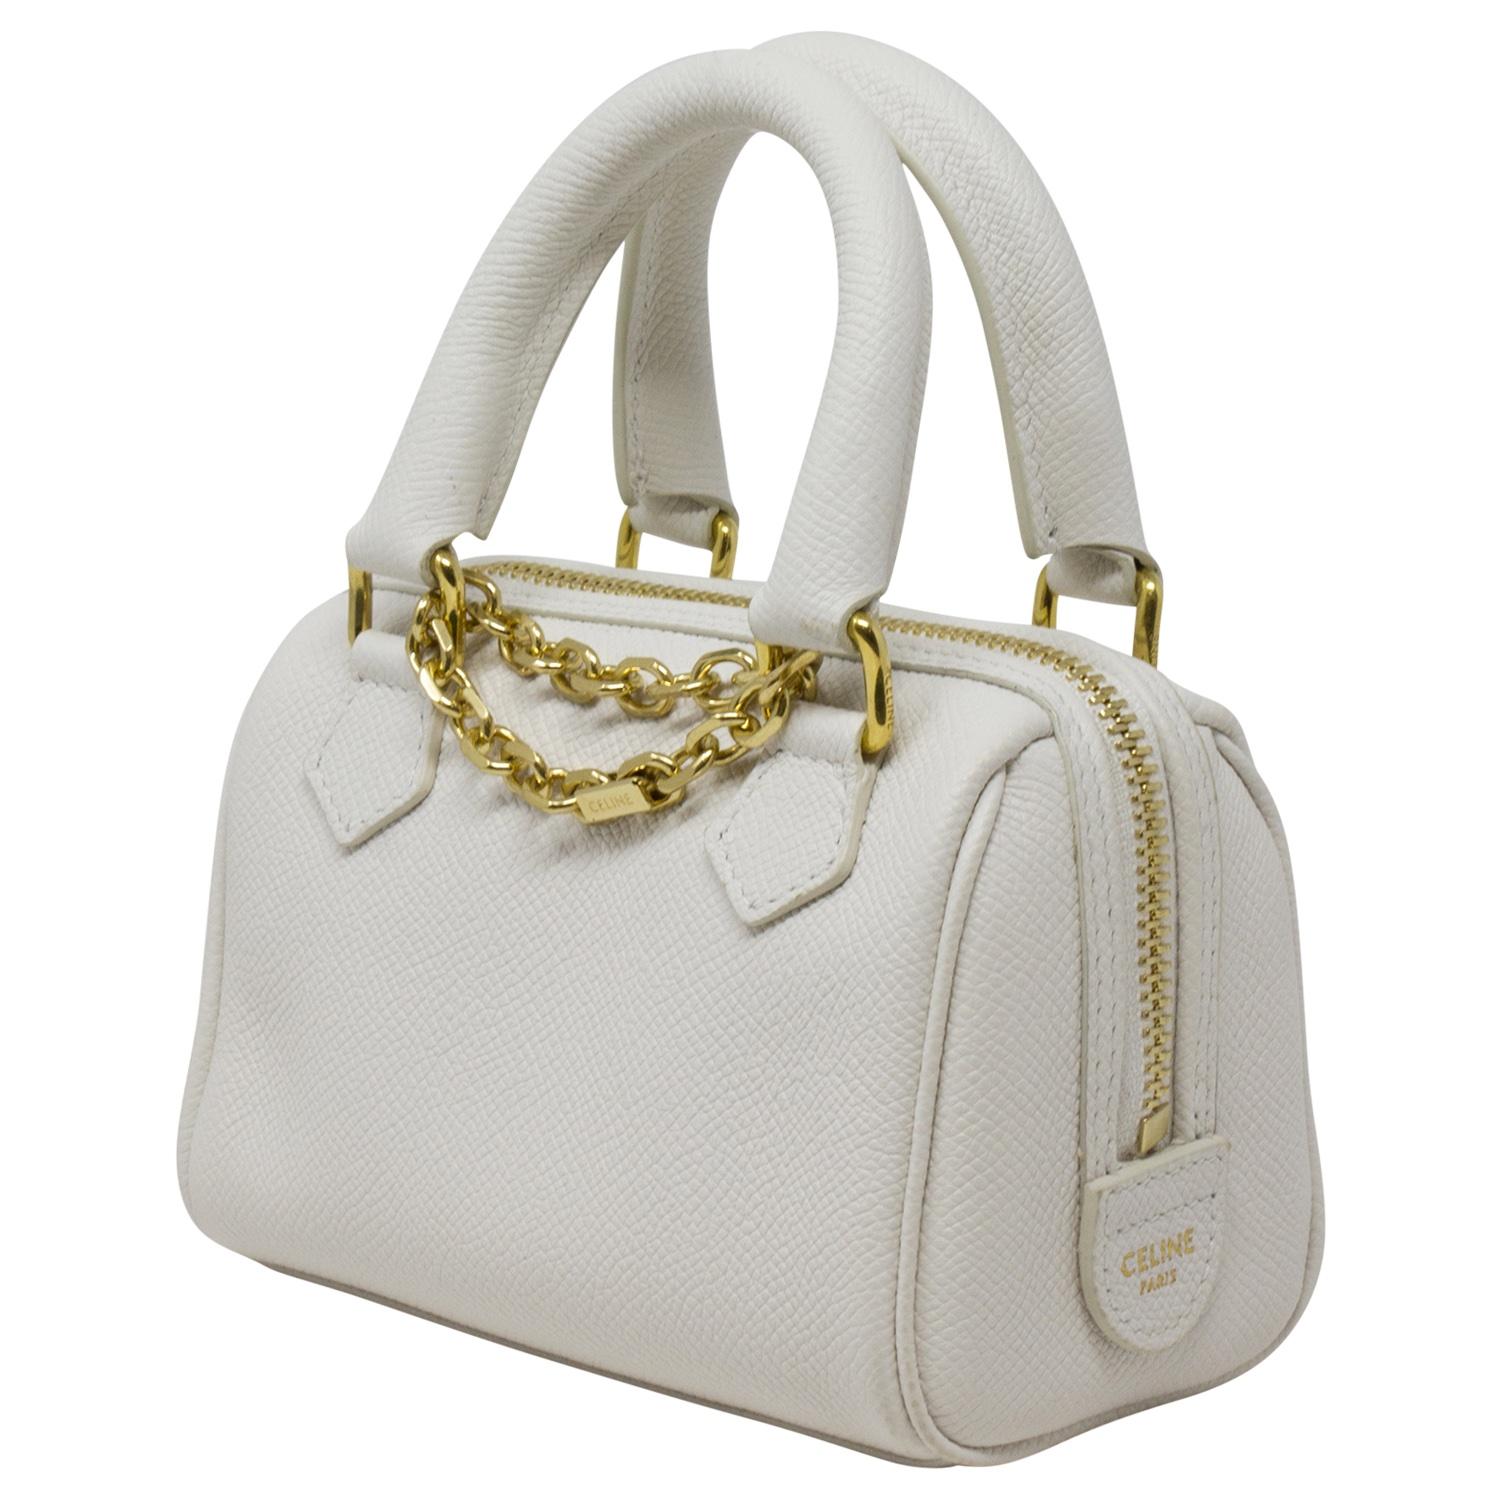 Too cute for us to handle! This Celine beauty is crafted in white grained leather, gold-tone hardware, an optional strap, chain-link charm and dual top handles. This limited edition mini is as timeless and adorable as it gets! The zipped closure